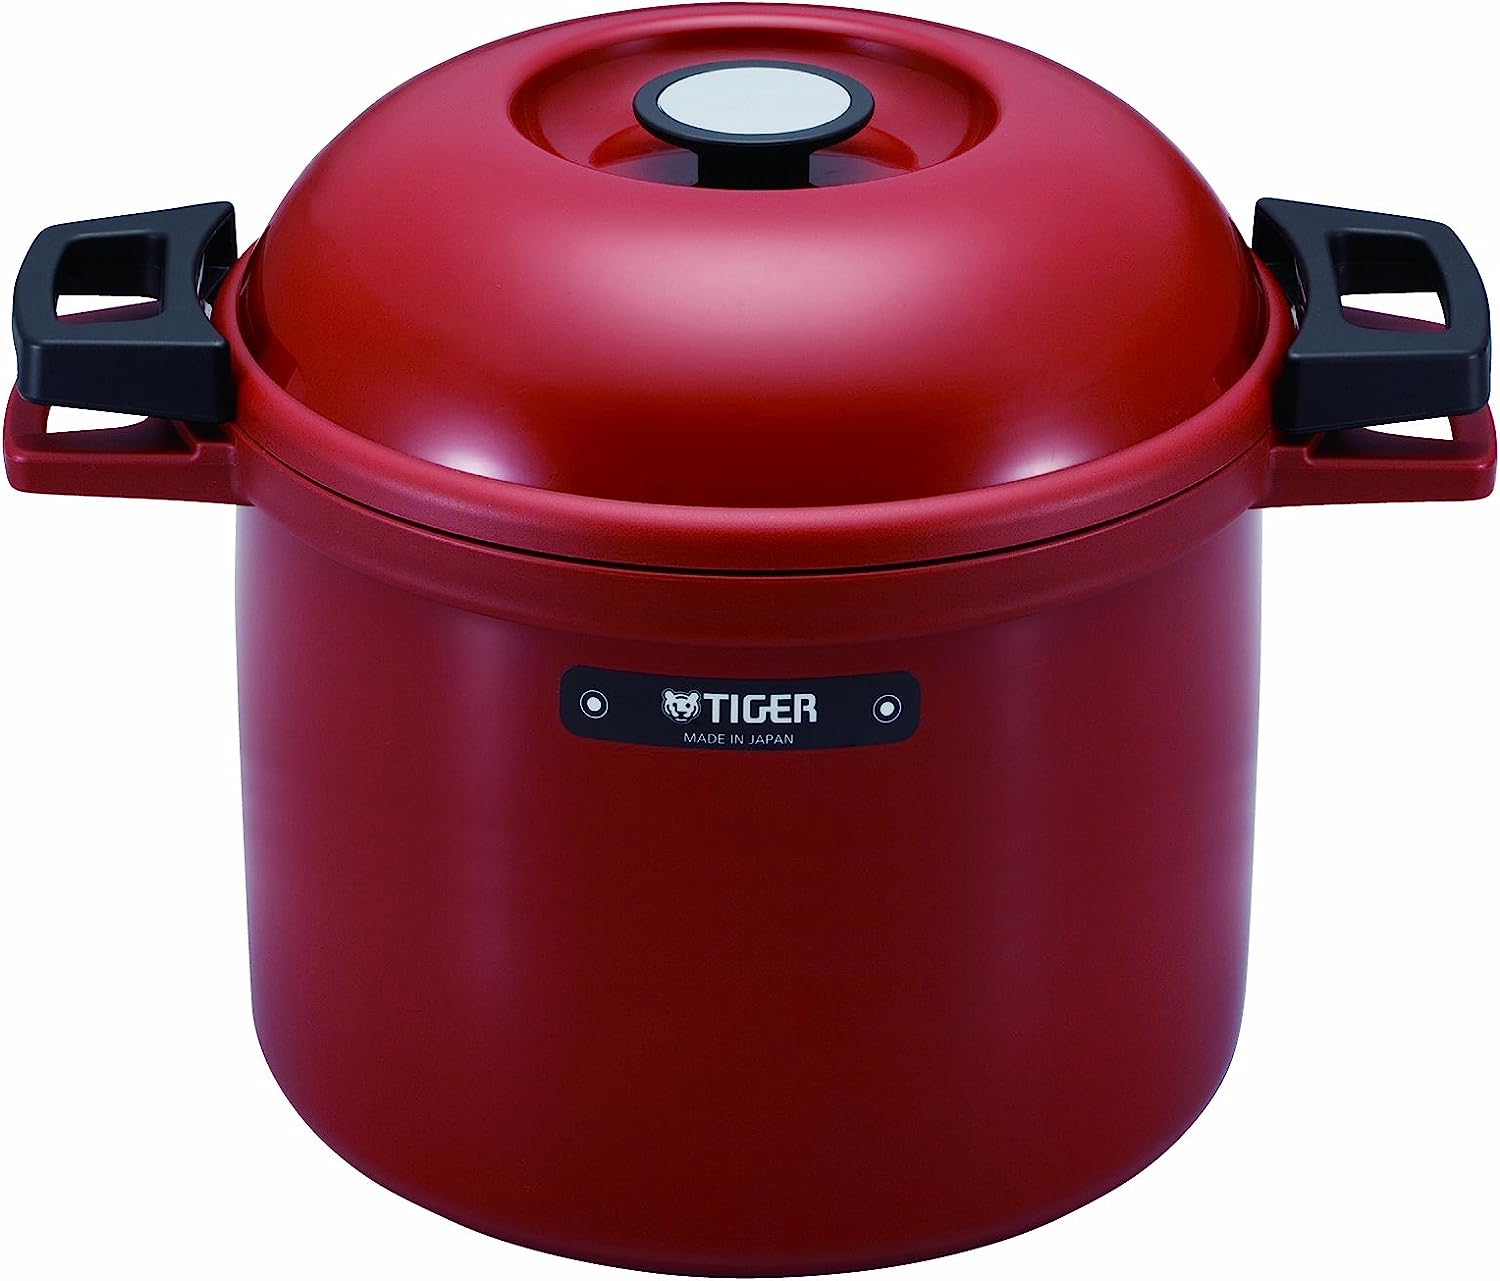 Tiger Non-Electric Thermal Slow Cooker, 4.5 Liters